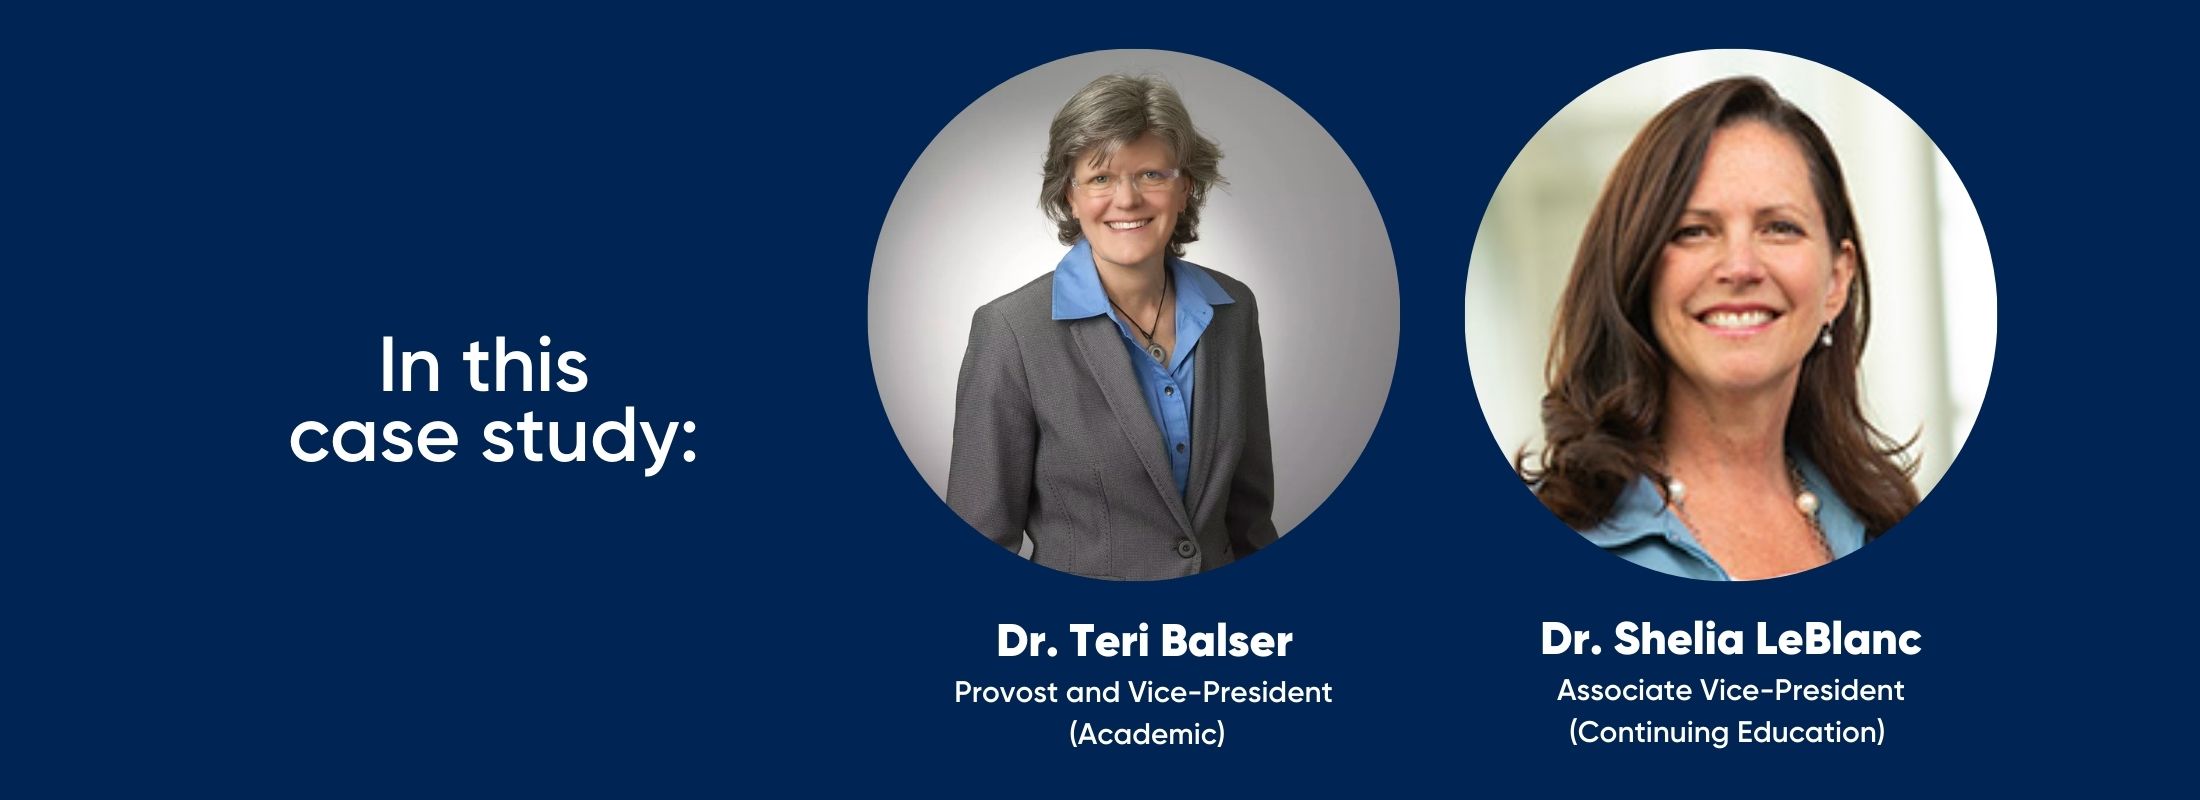 in this case study: Dr. Teri Balser, Provost and Vice President (Academic) and Dr. Sheila LeBlanc, Associate Vice-President (Continuing Education) 